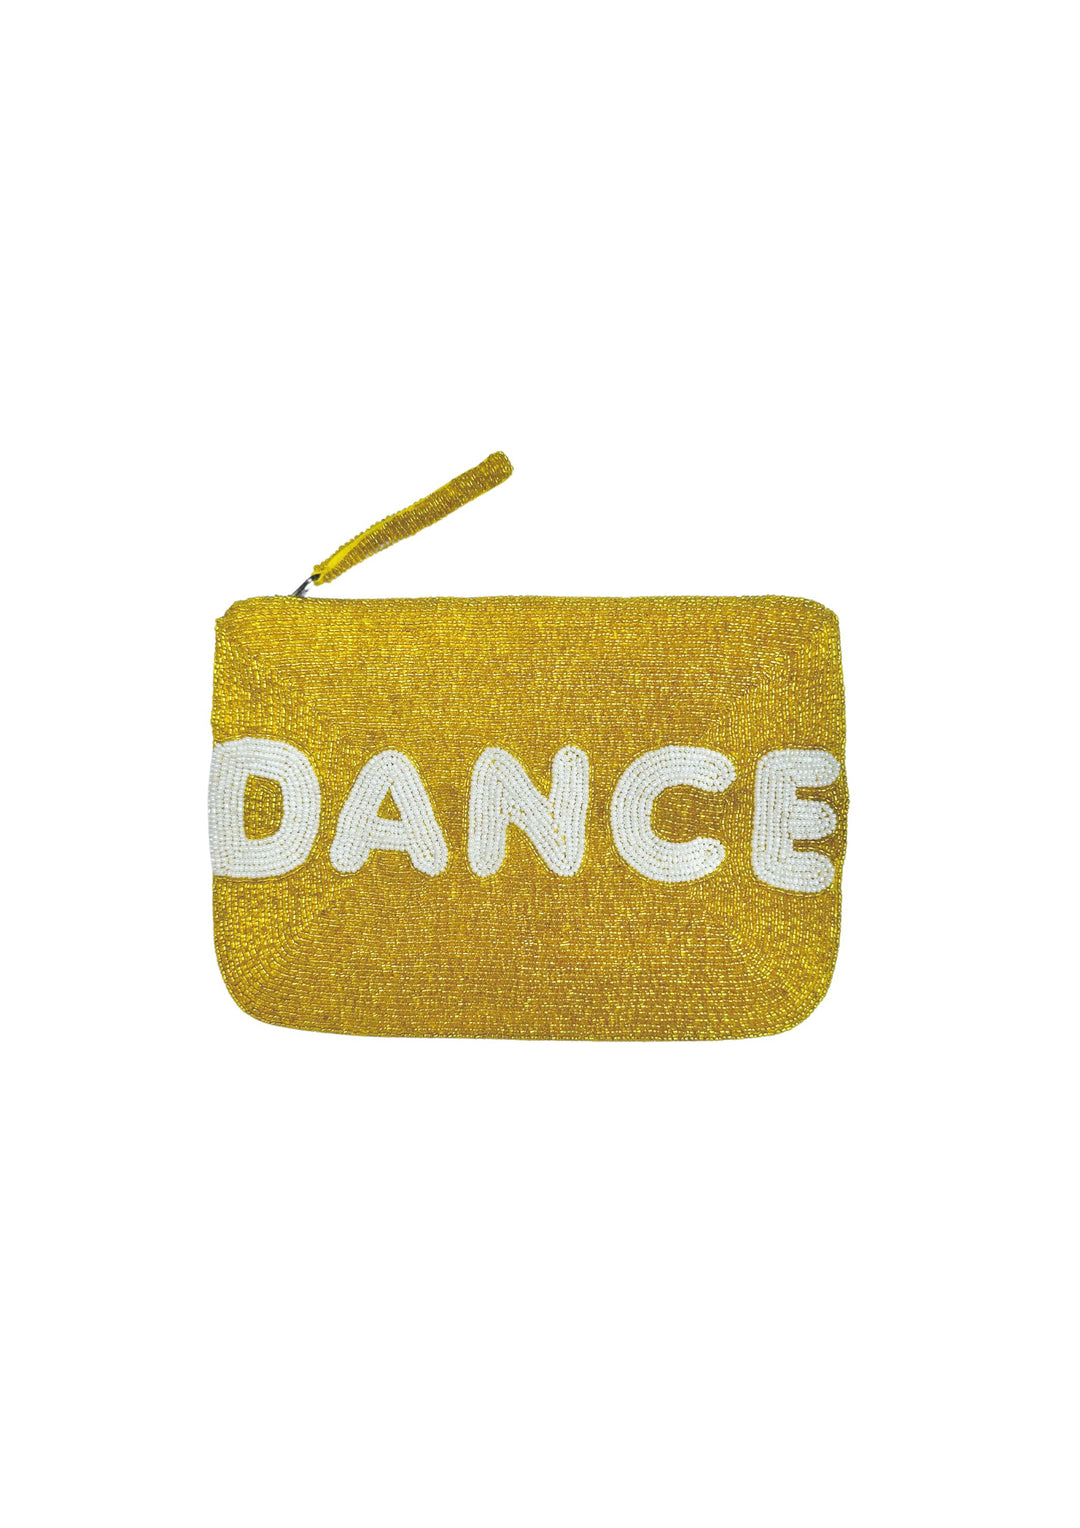 The Jacksons | Dance Gold and White Handmade Beaded Clutch